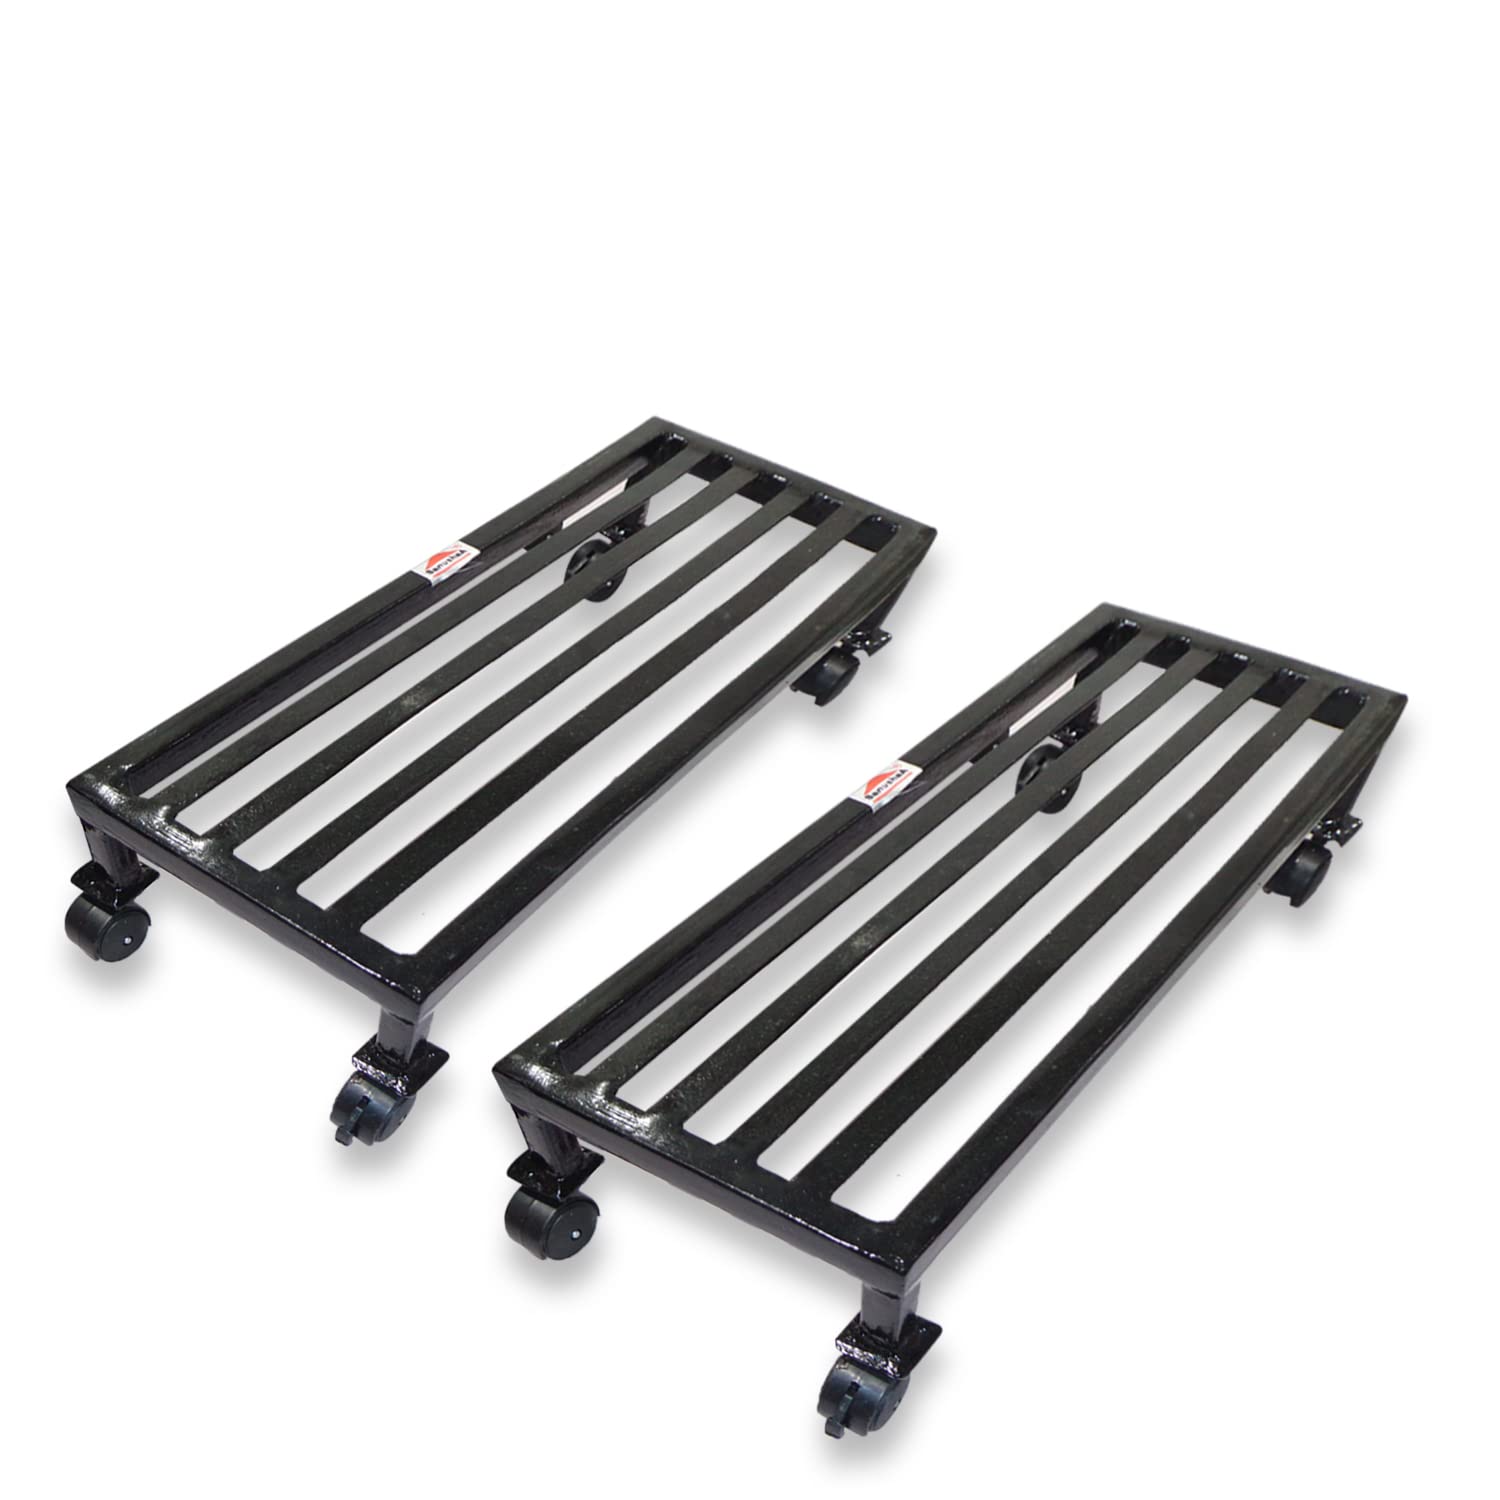 SANUSHAA Metal Plant Stand with Wheels Set of 2, Book the metal stand online from the website of sanushaa technologies pvt ltd www.sanushaa.in